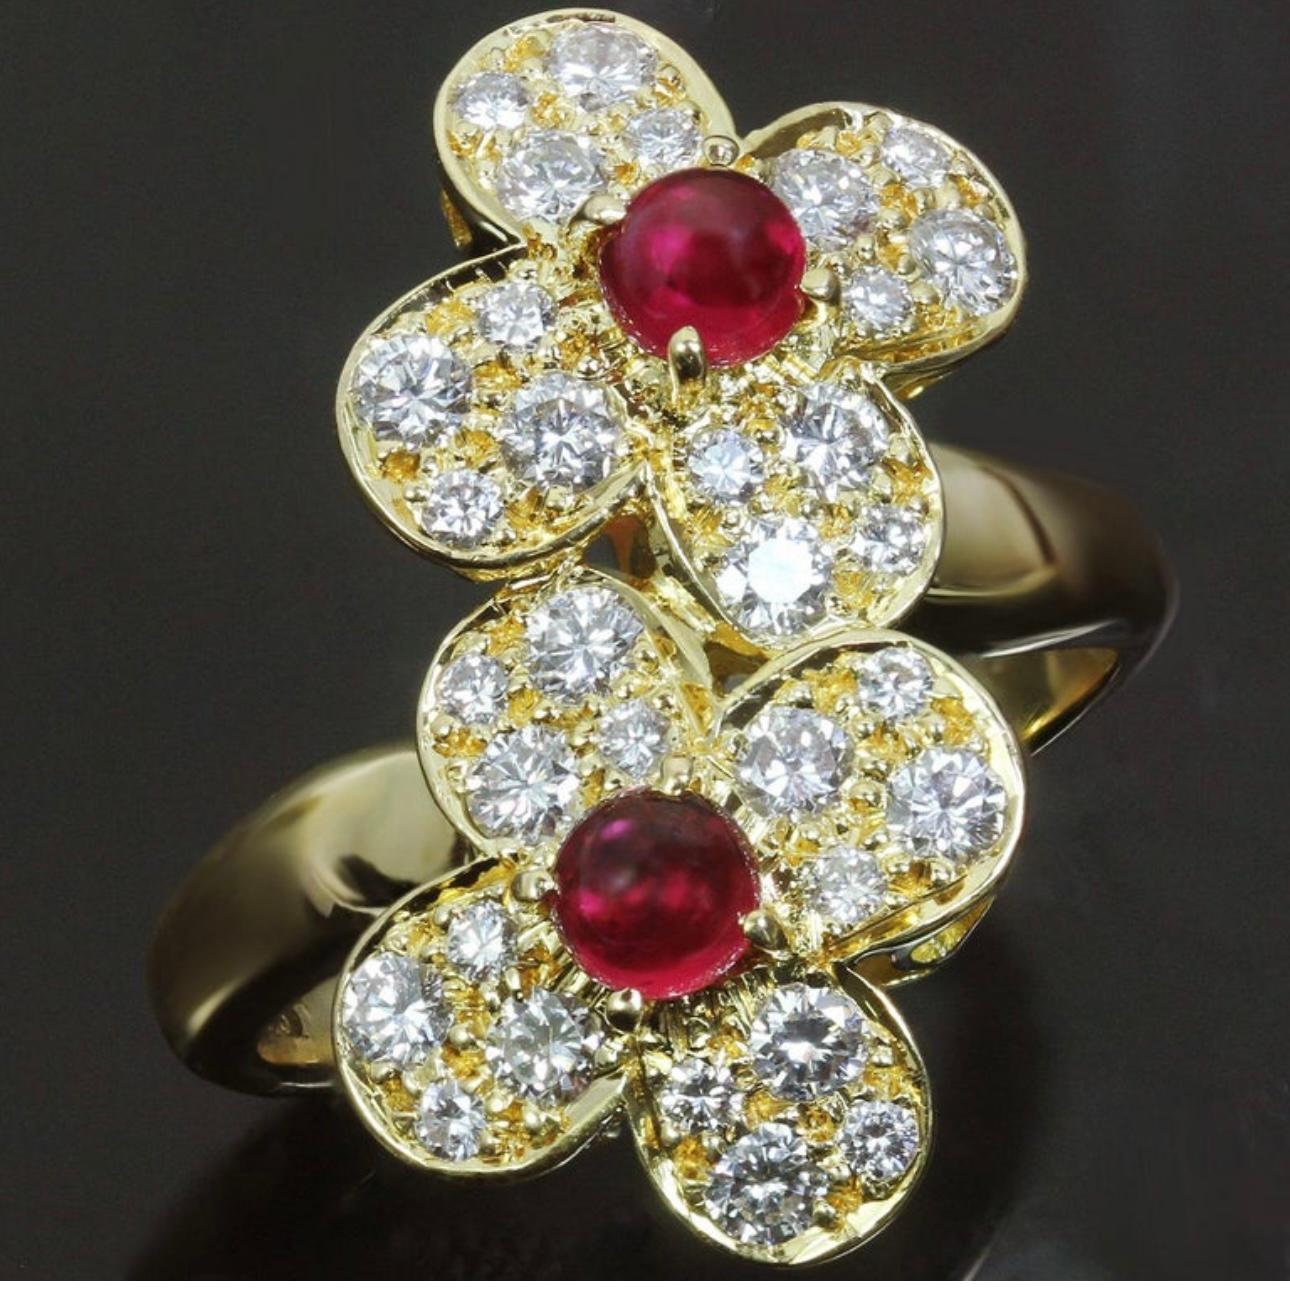 VAN CLEEF & ARPELS
Created by Van Cleef & Arpels, this “Trefle” ring is composed of cabochon rubies and diamonds. The bypass form ring is designed as two pave-set diamond blossoms, each centering a cabochon ruby. This unusual twin-flower Trefle ring